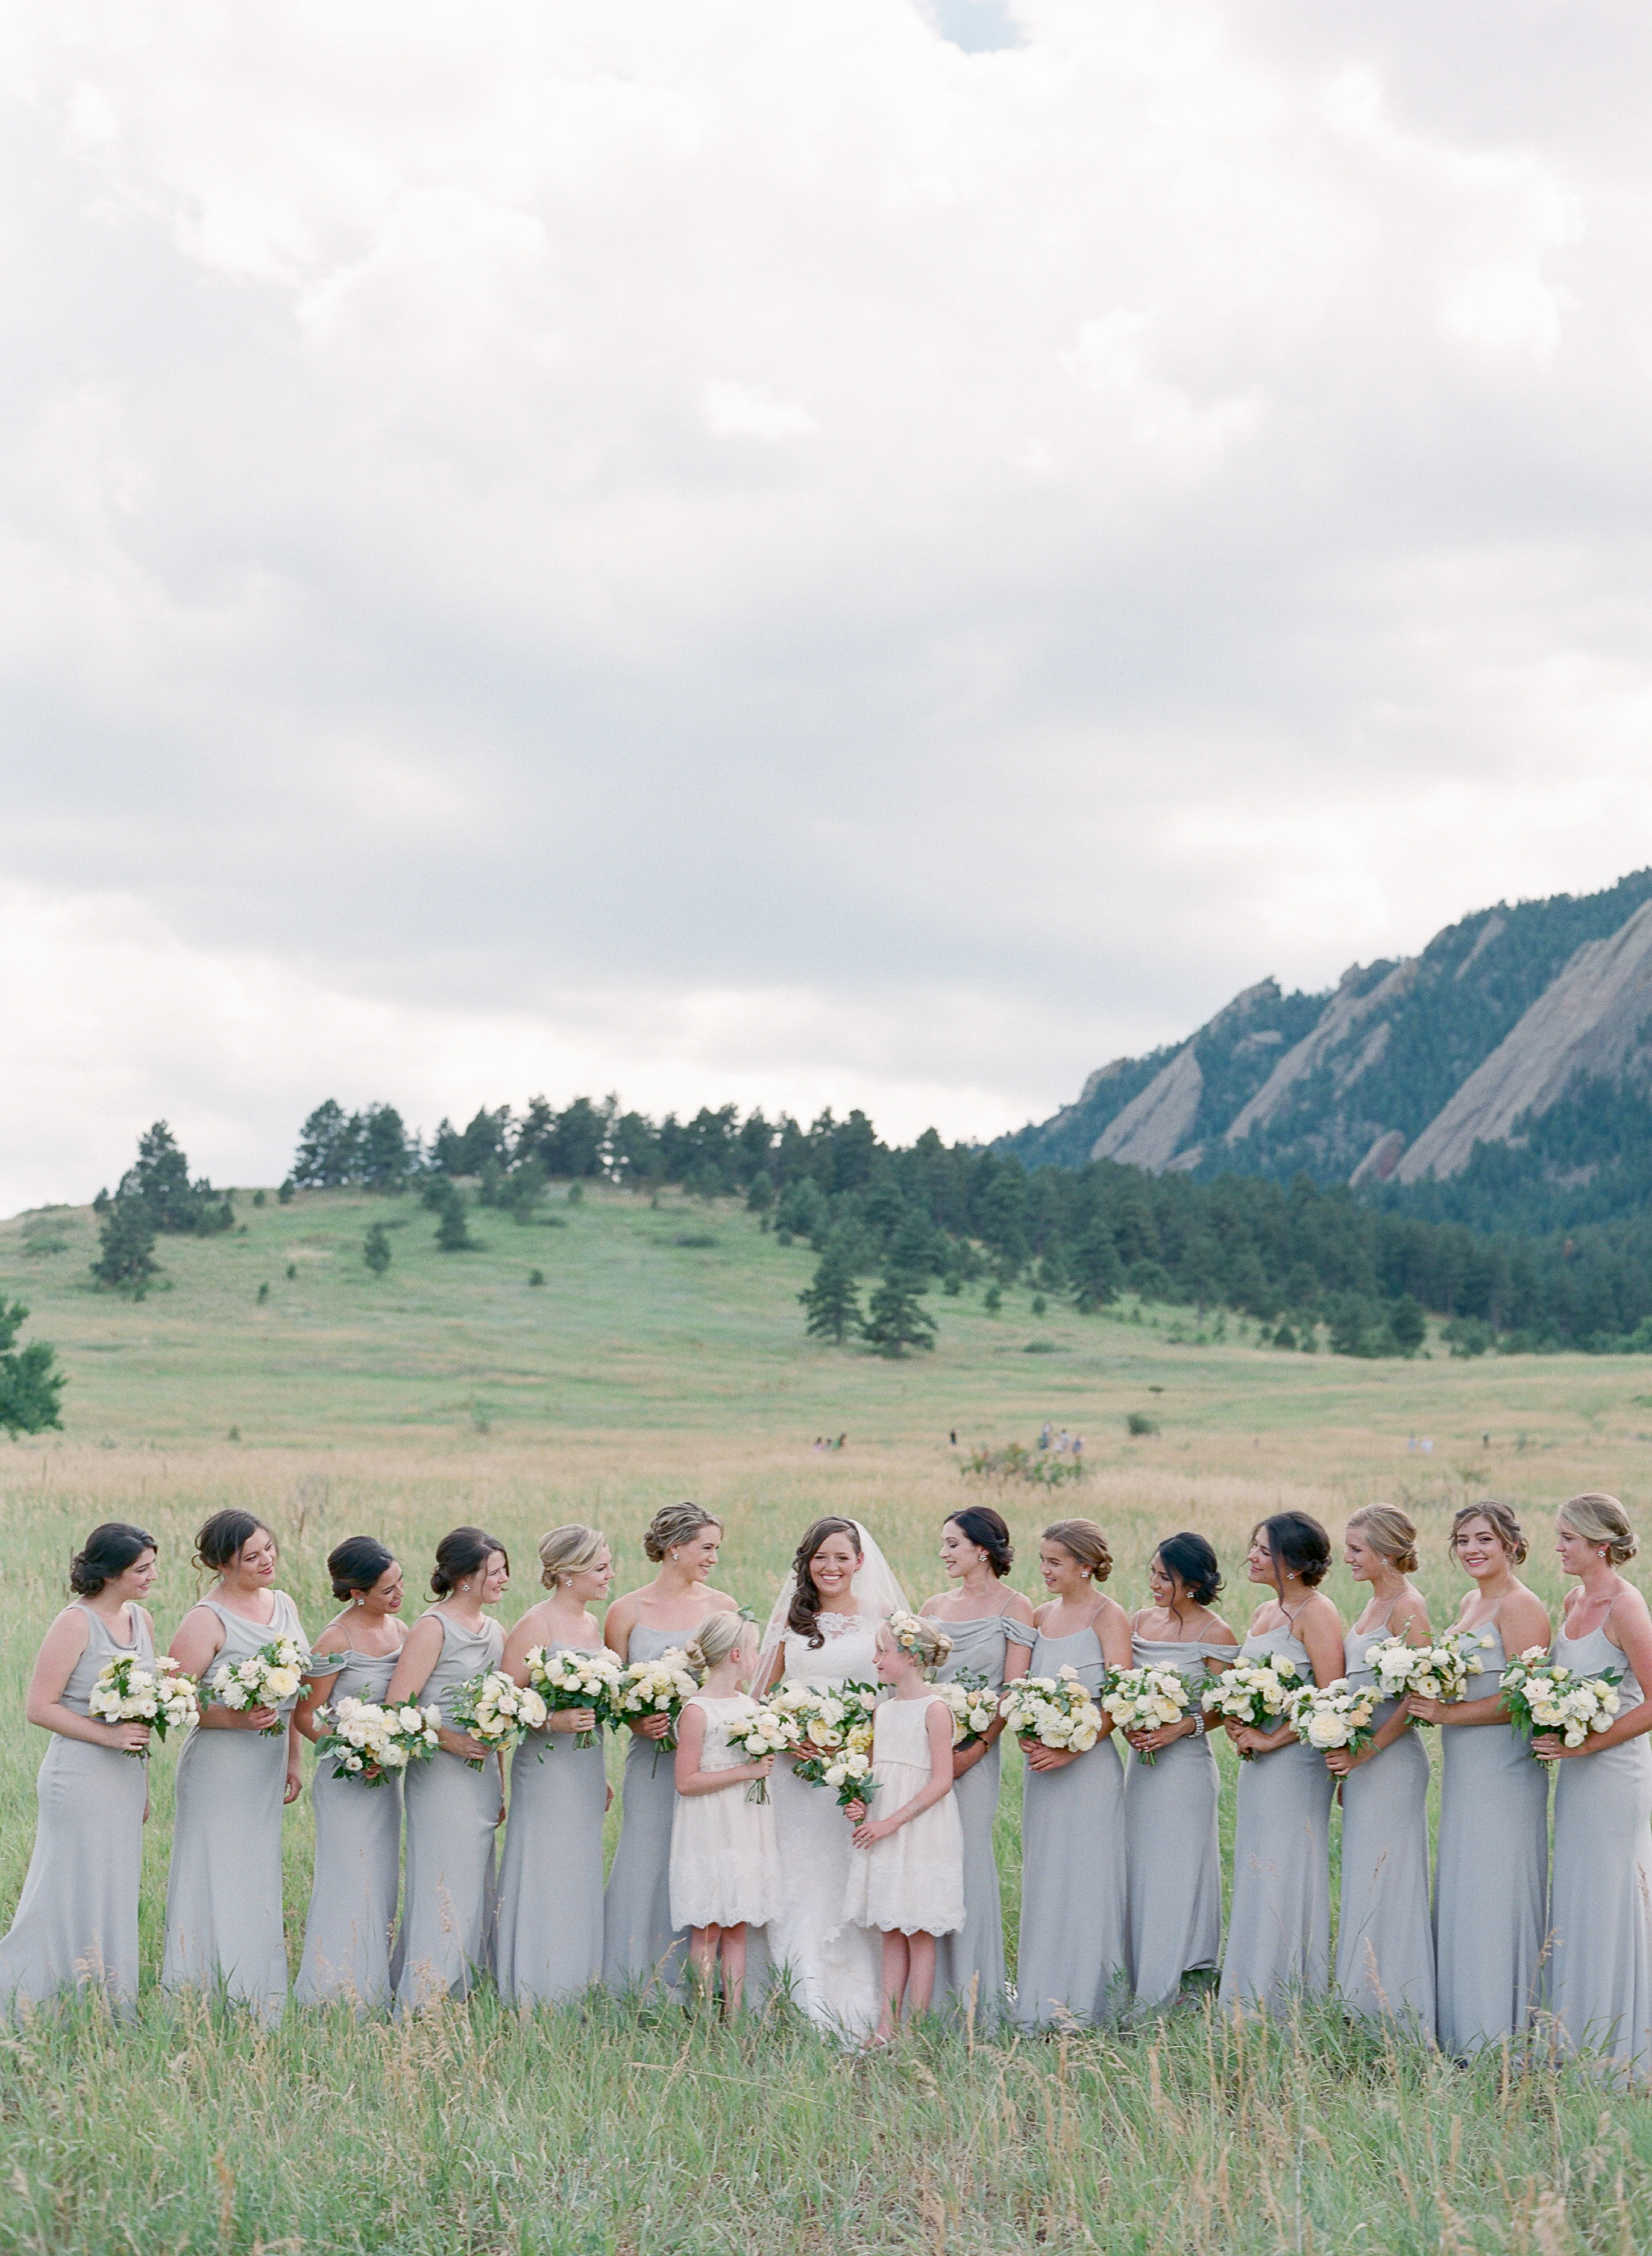 wedding bridal party photo with flower girls outdoors